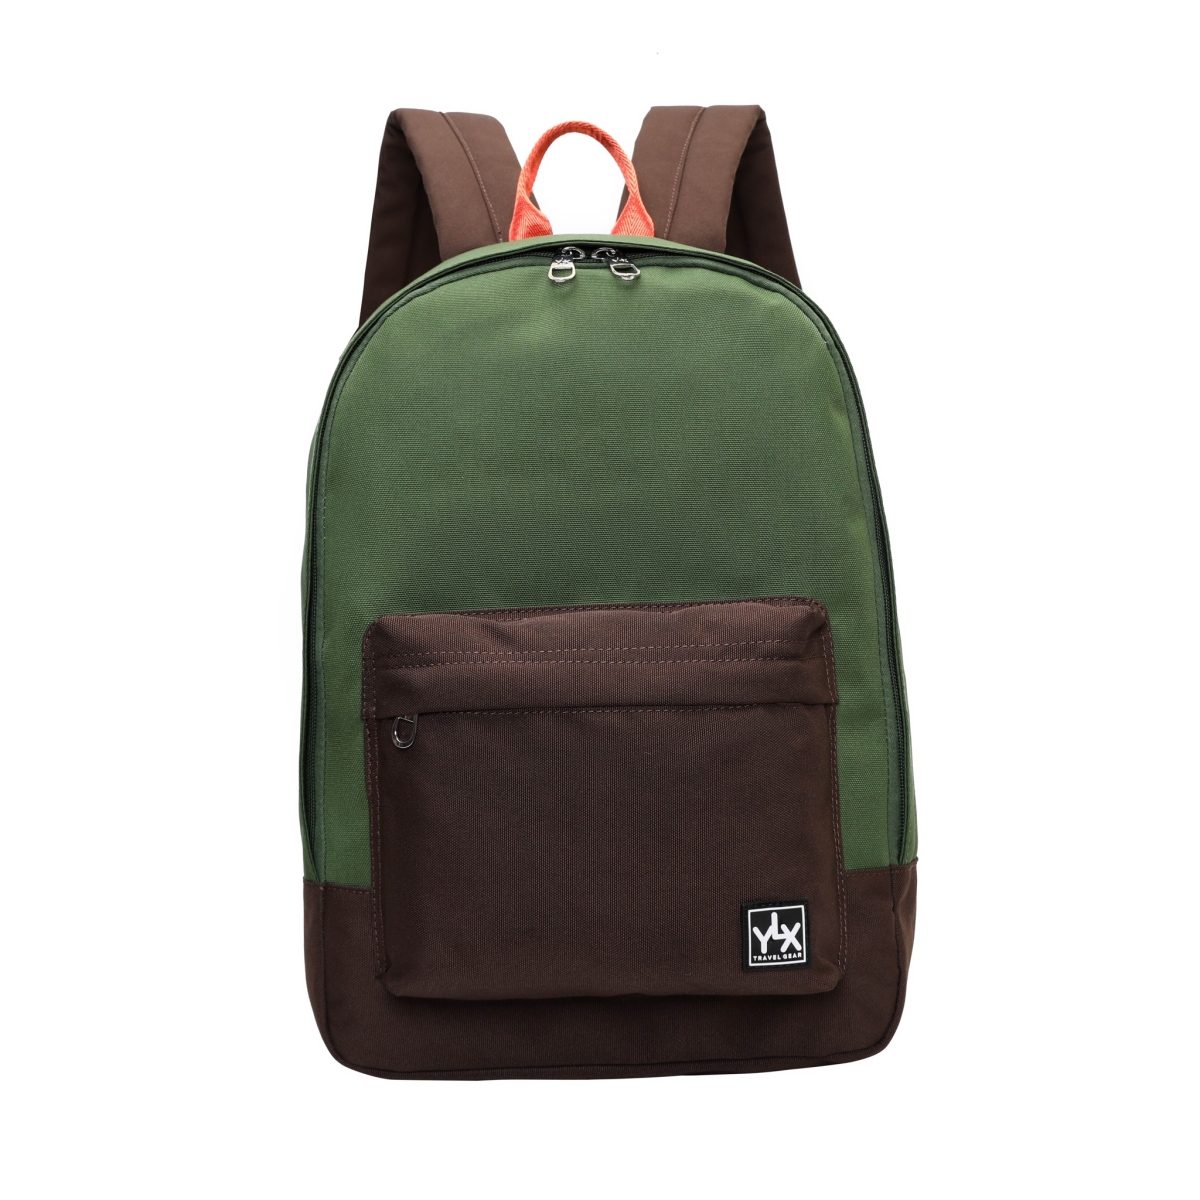 YLX Classic Backpack | Army Green & Dark Brown